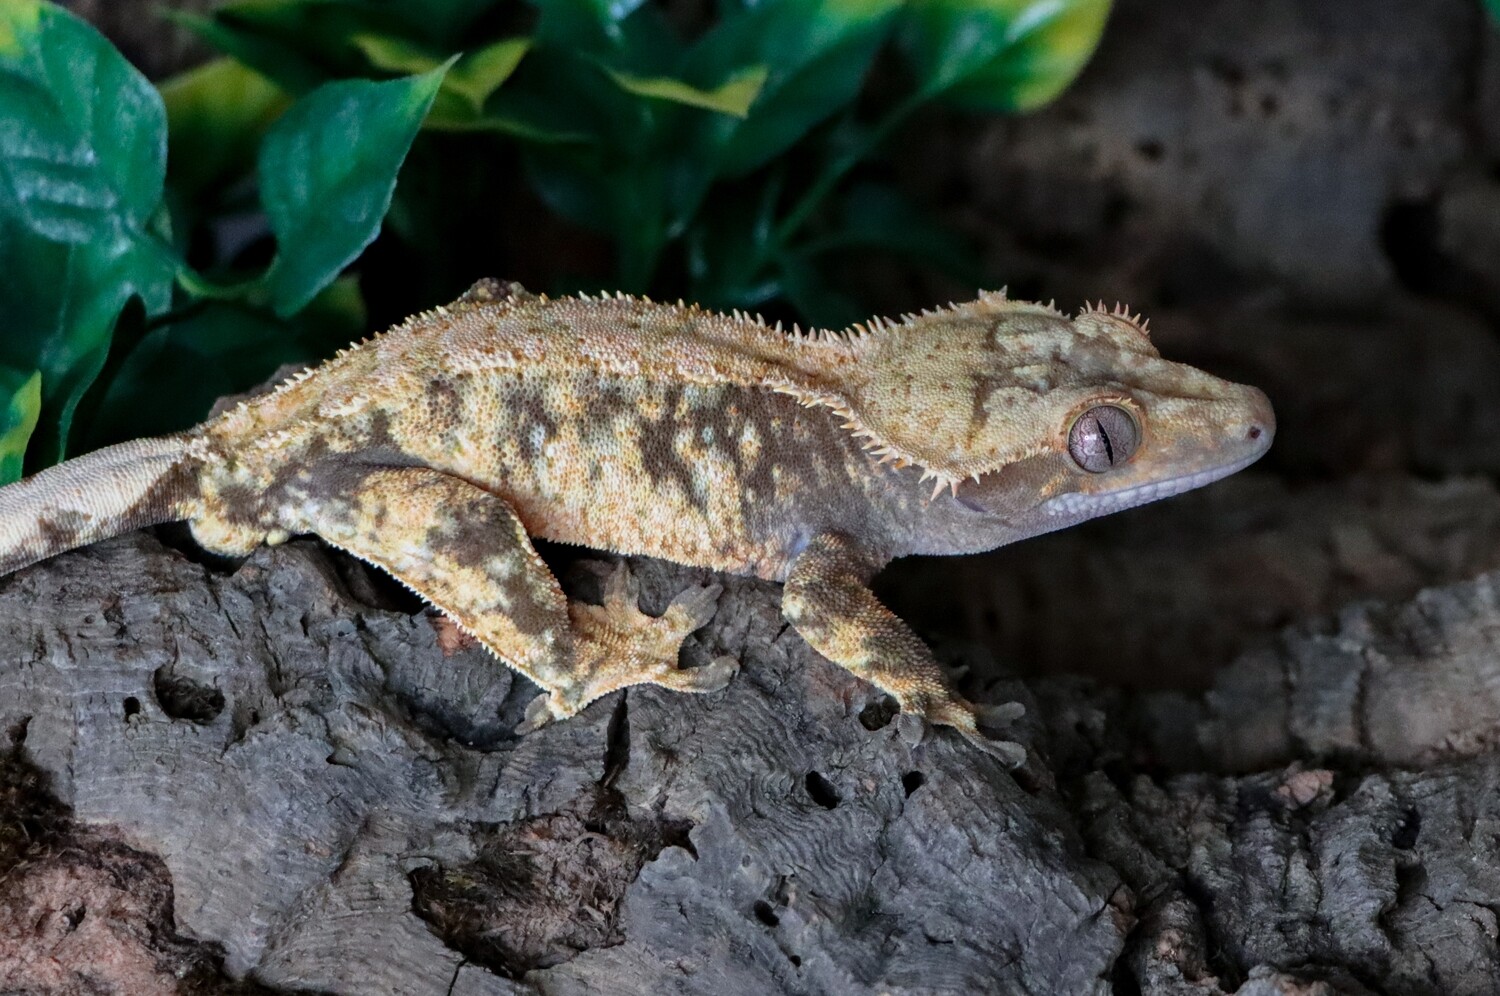 Extreme Tricolor Crested Gecko [Male] [Zion] [UE047]